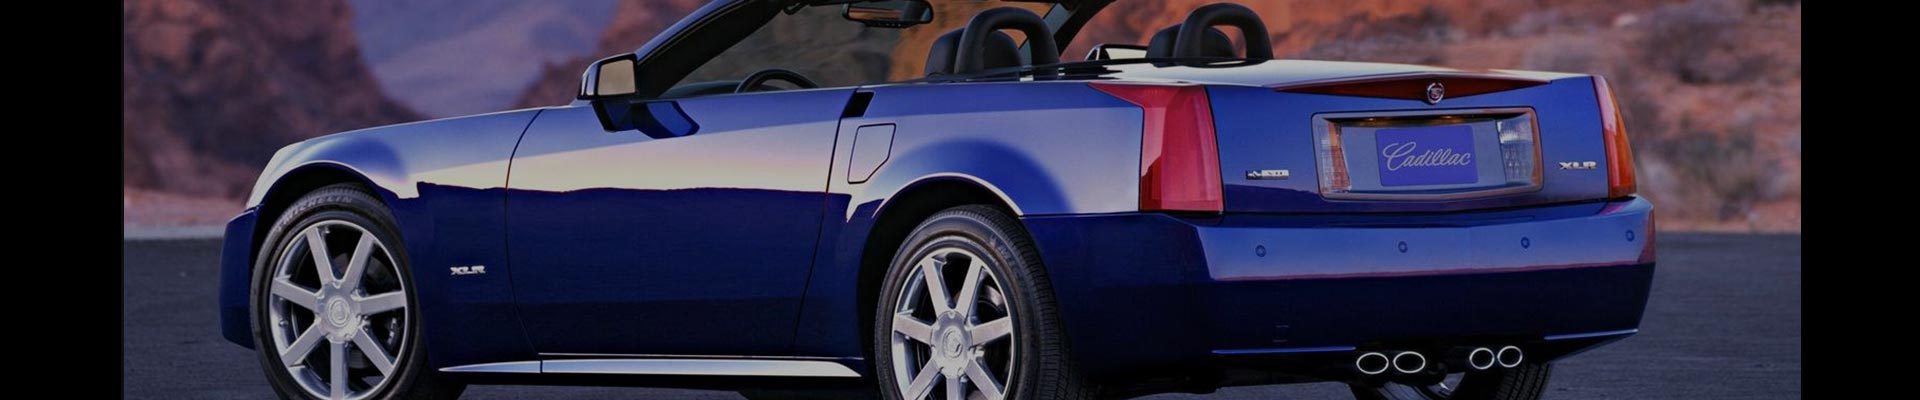 Shop Replacement and OEM 2005 Cadillac XLR Parts with Discounted Price on the Net